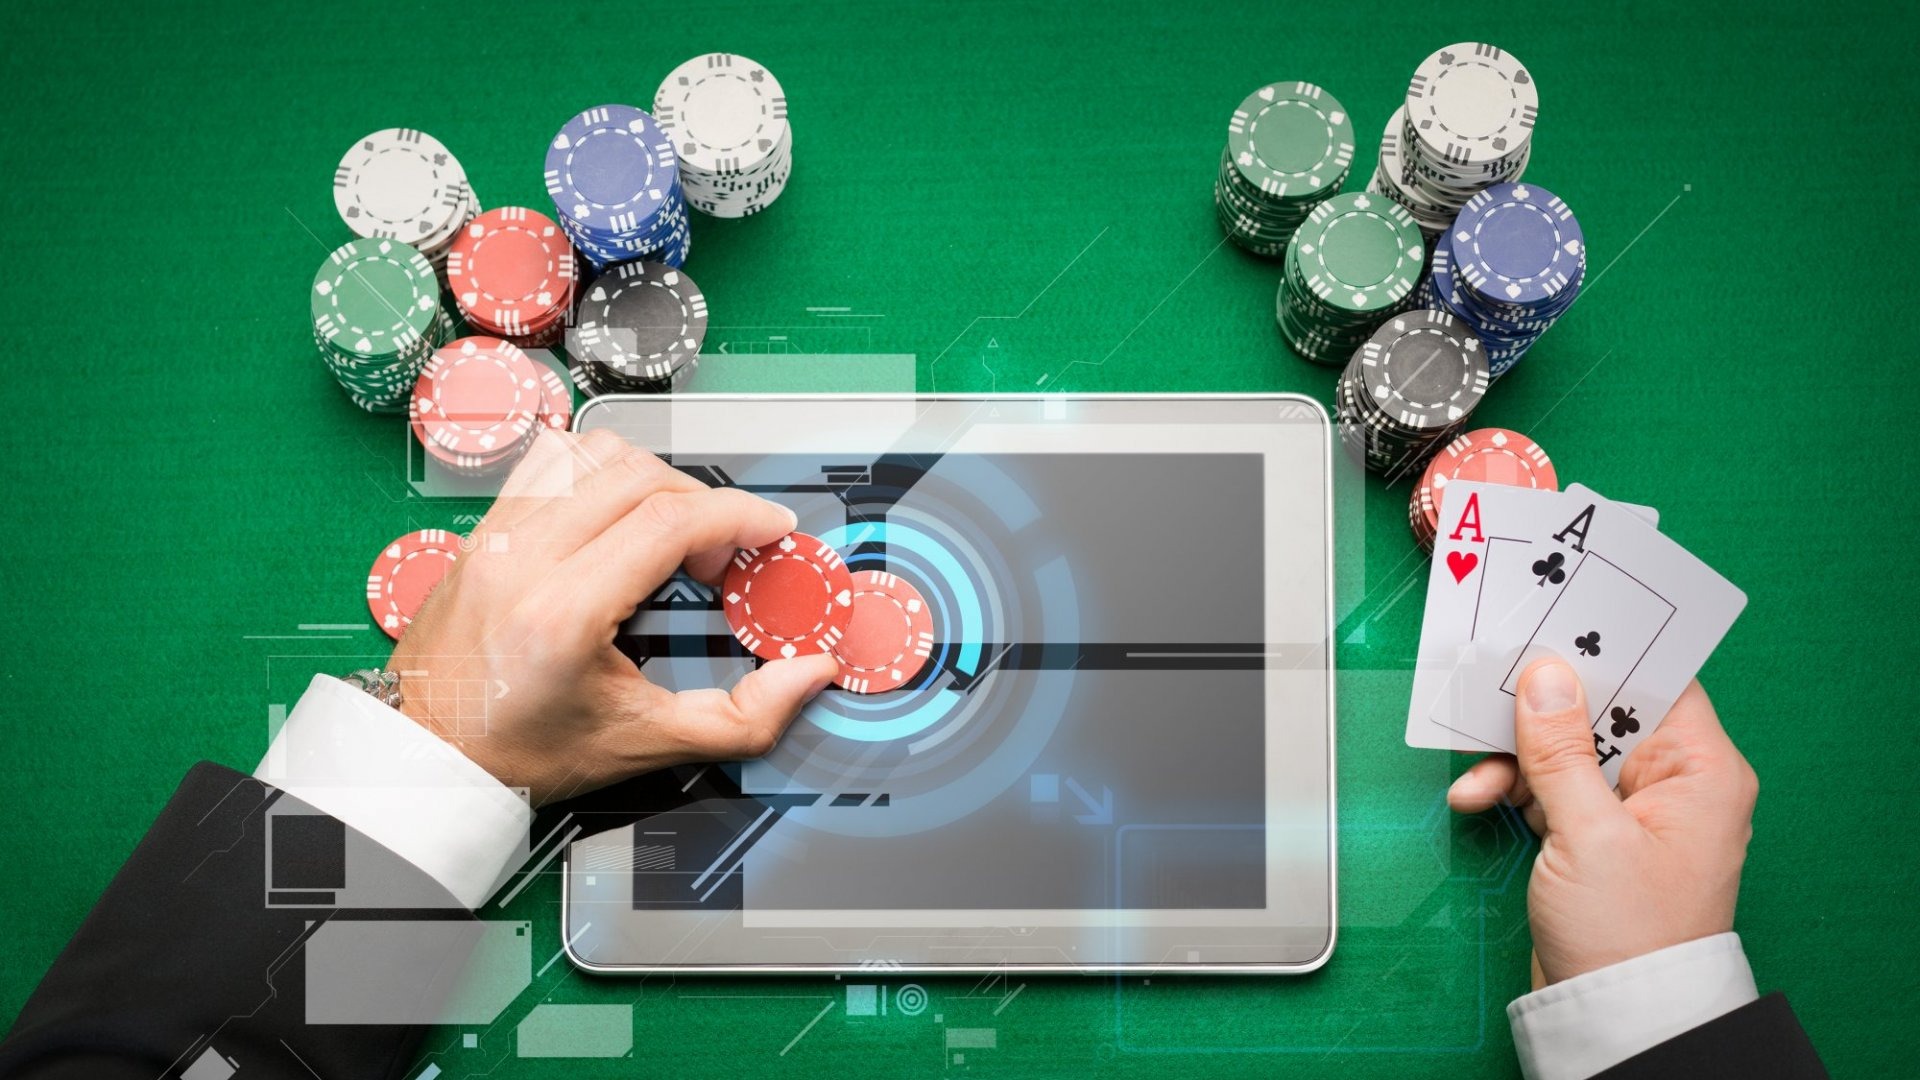 igaming industry